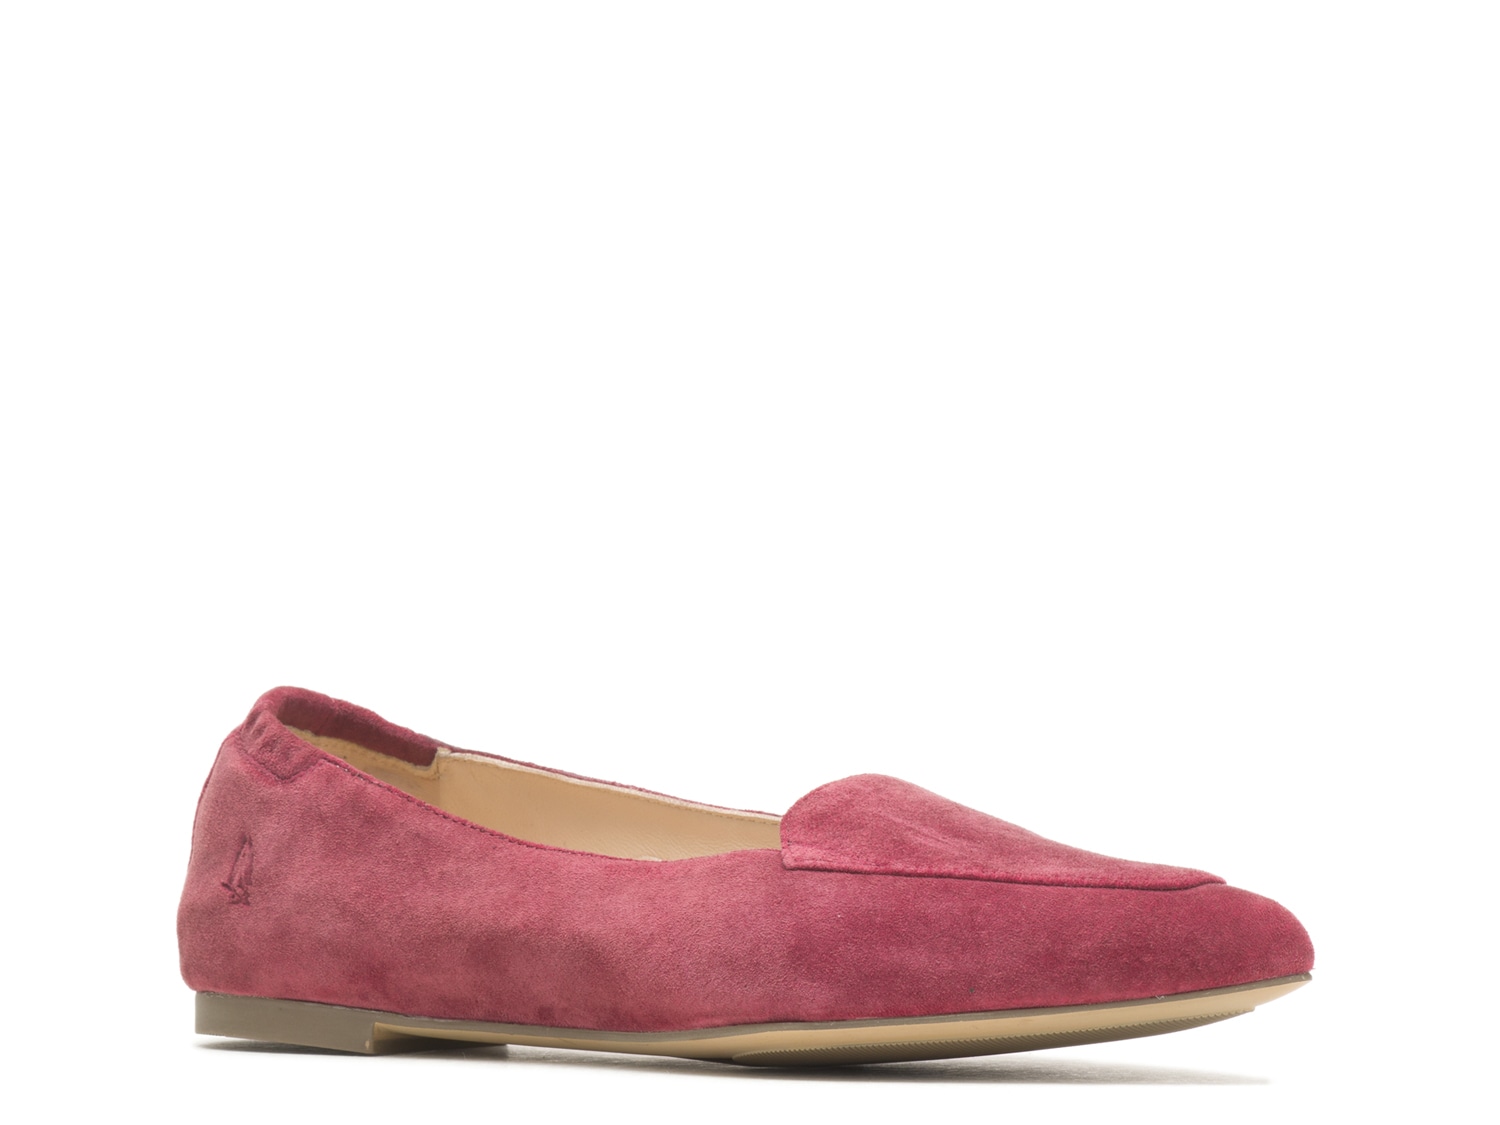 Hush Puppies Hazel Pointe Loafer - Free Shipping | DSW